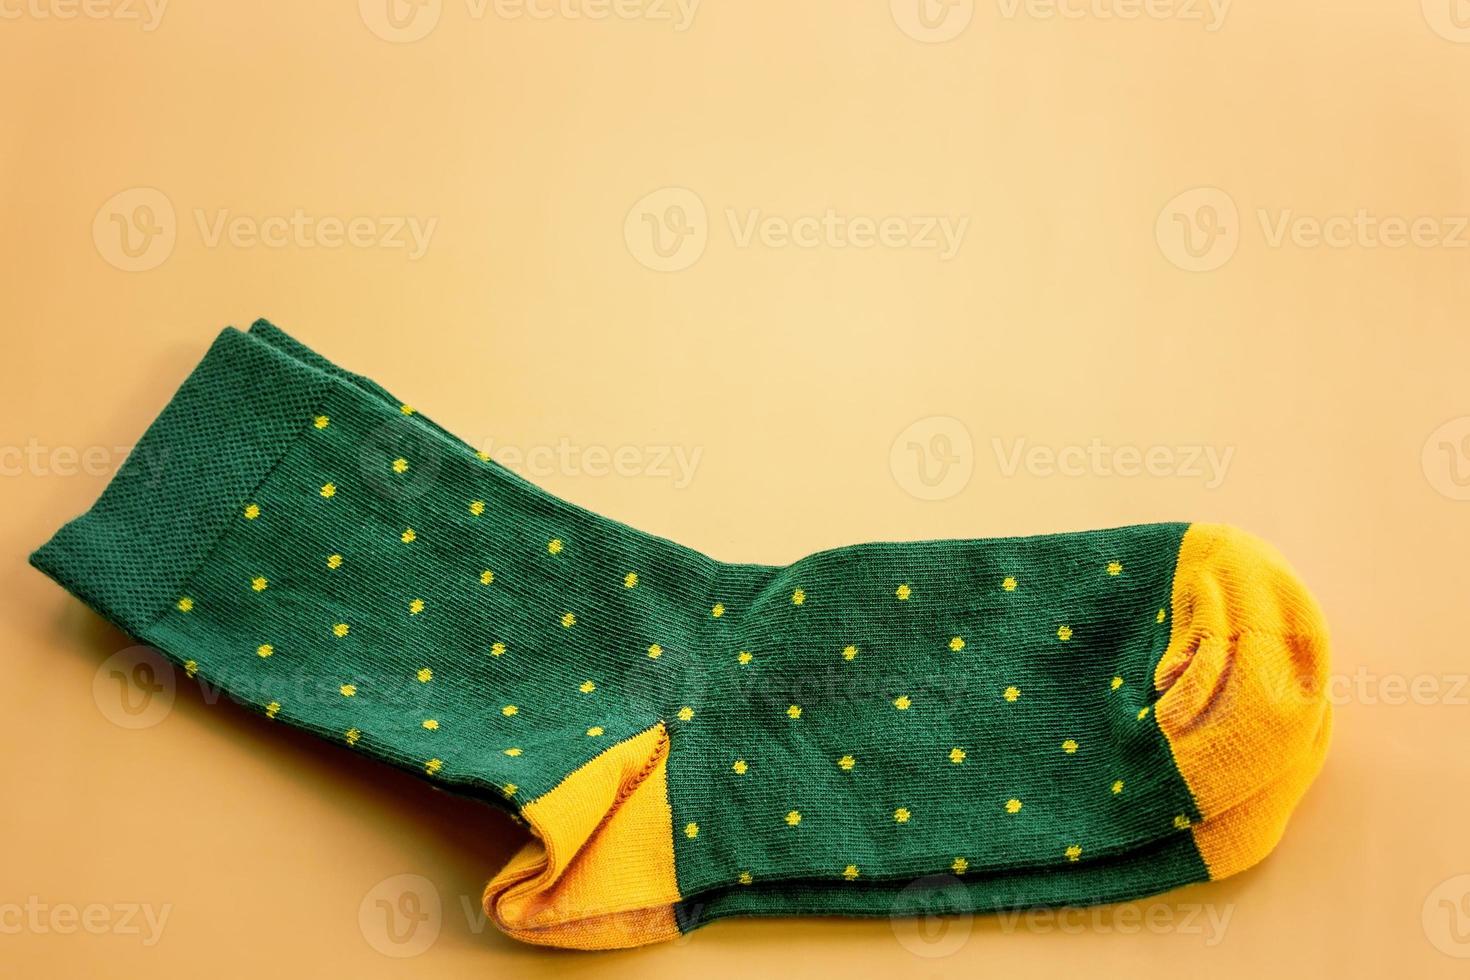 Green socks with yellow polka dots. A pair of socks on a beige background. photo